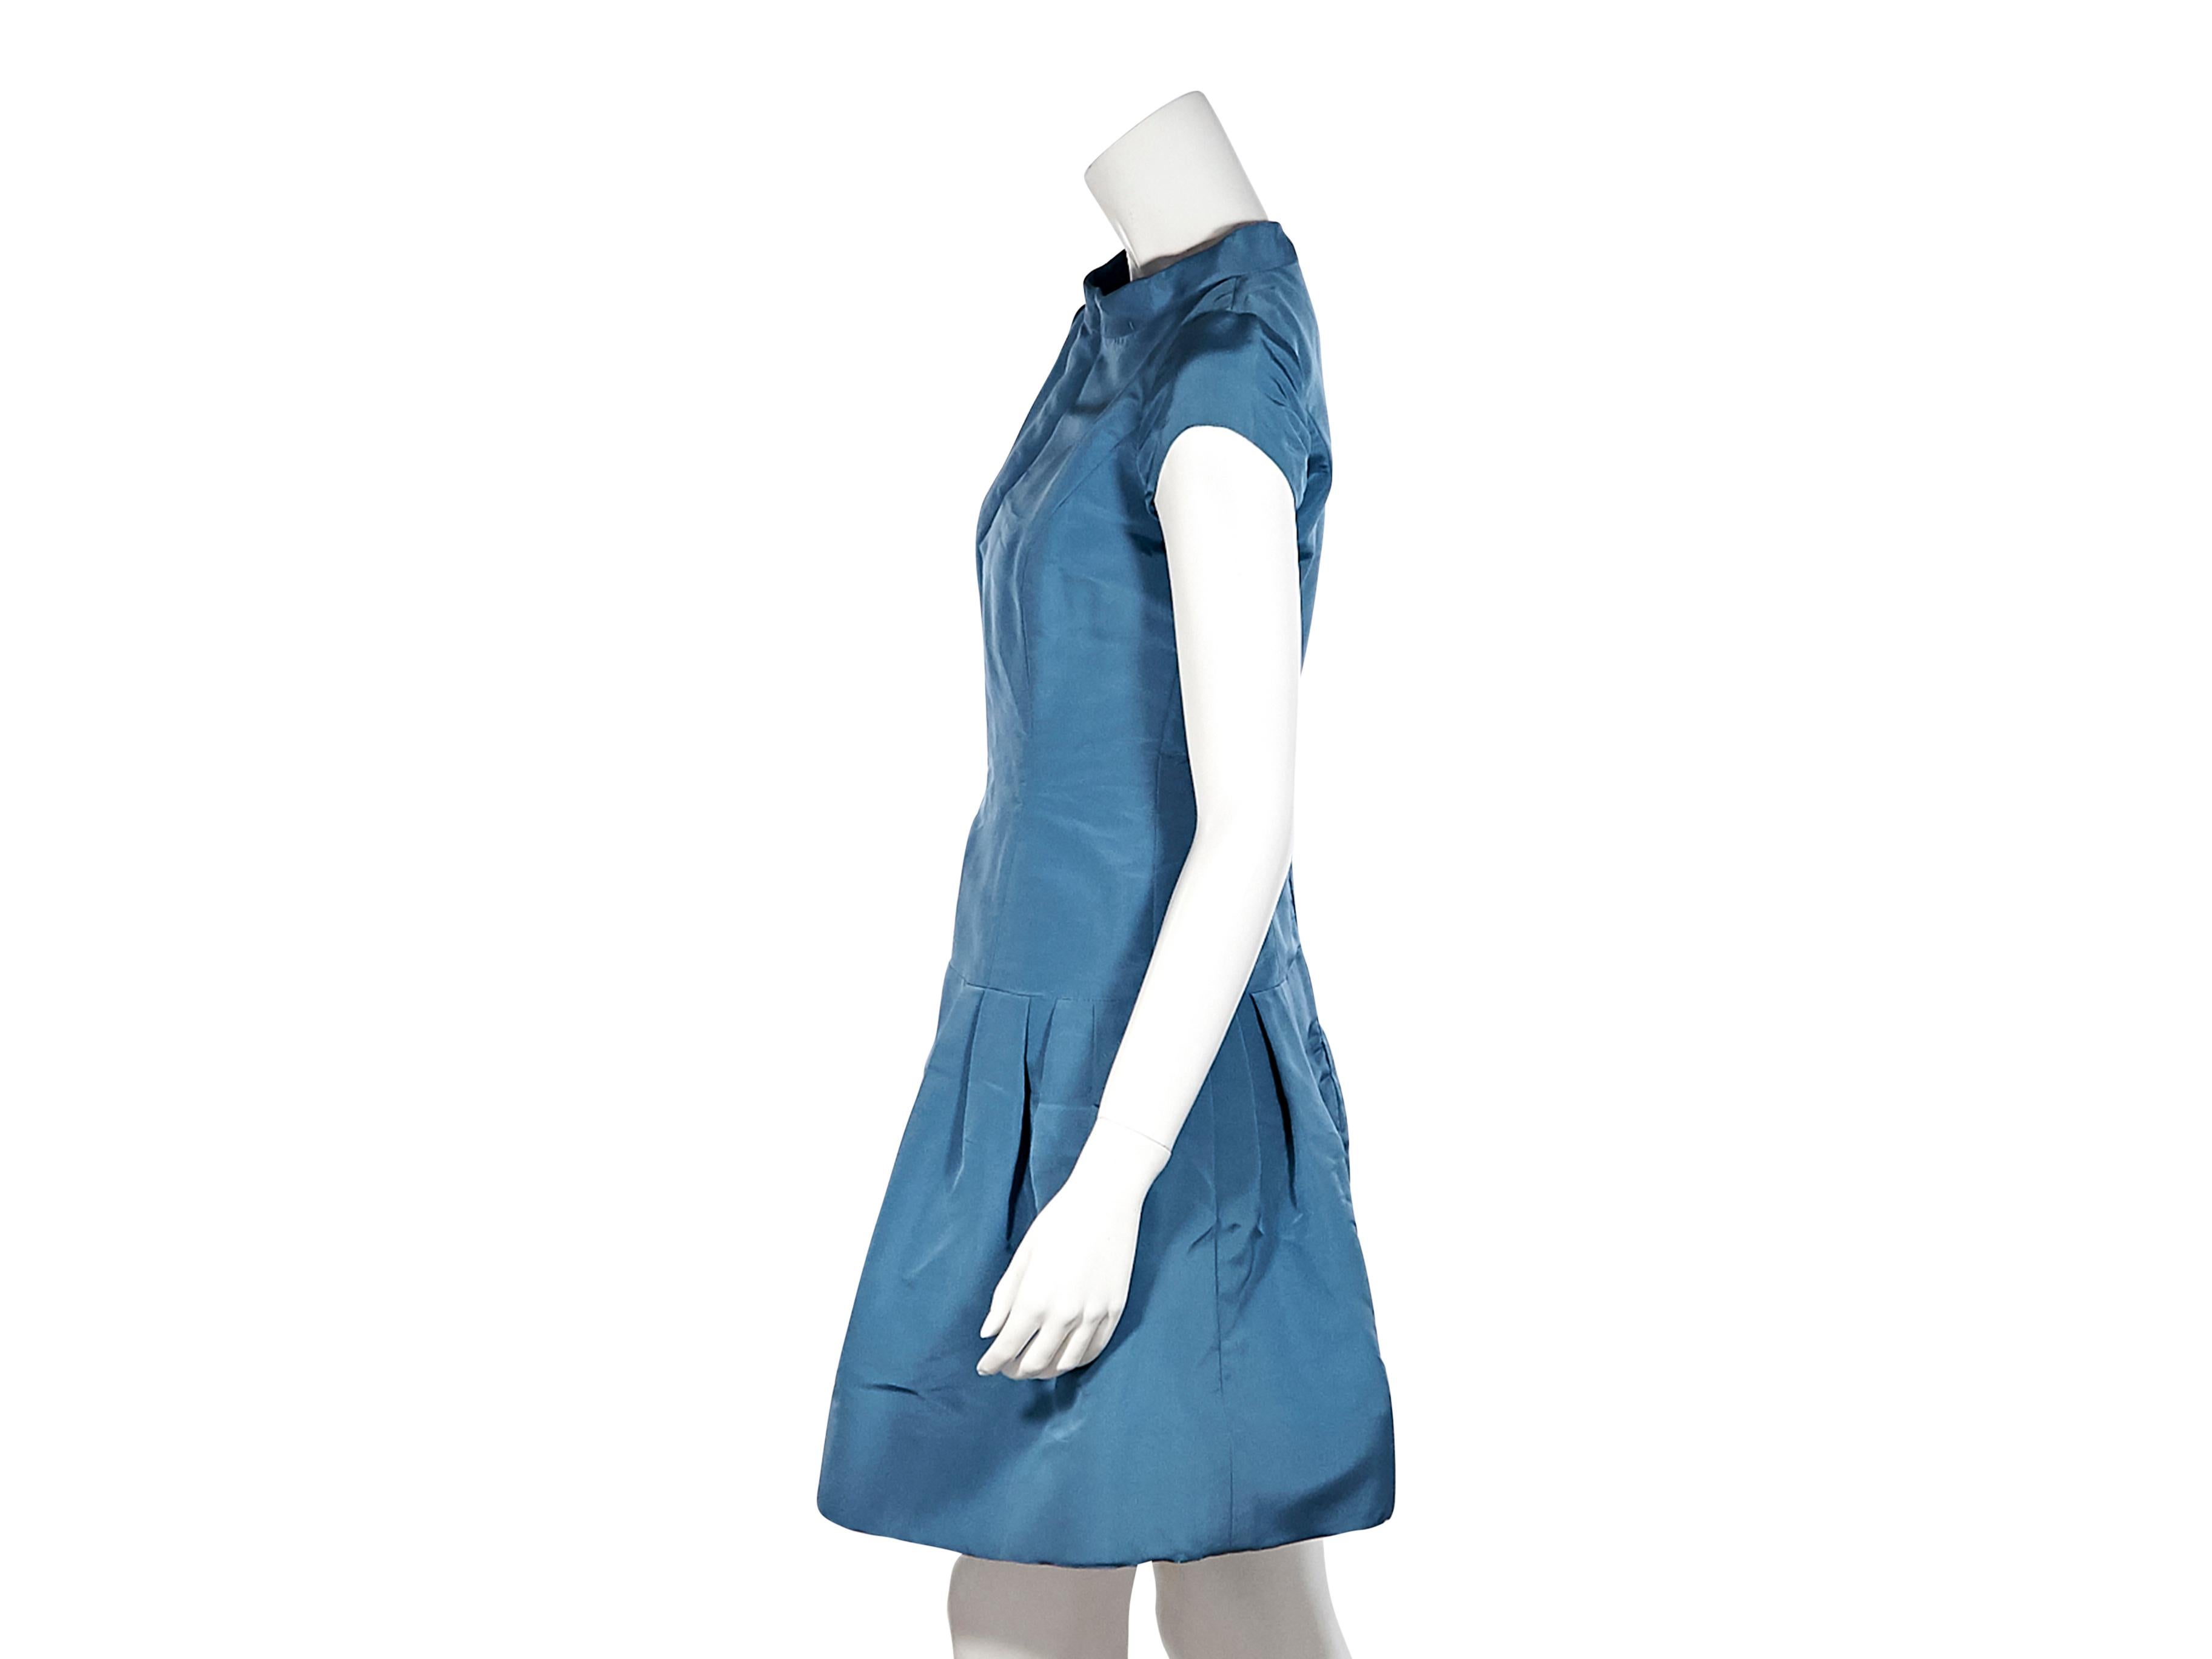 Product details:  Blue taffeta A-line mini dress by Oscar De La Renta.  Trimmed with lace. Bateau neckline. Cap sleeves. Drop waist. Concealed back zip closure. Style yours with long gold-tone earrings. 34